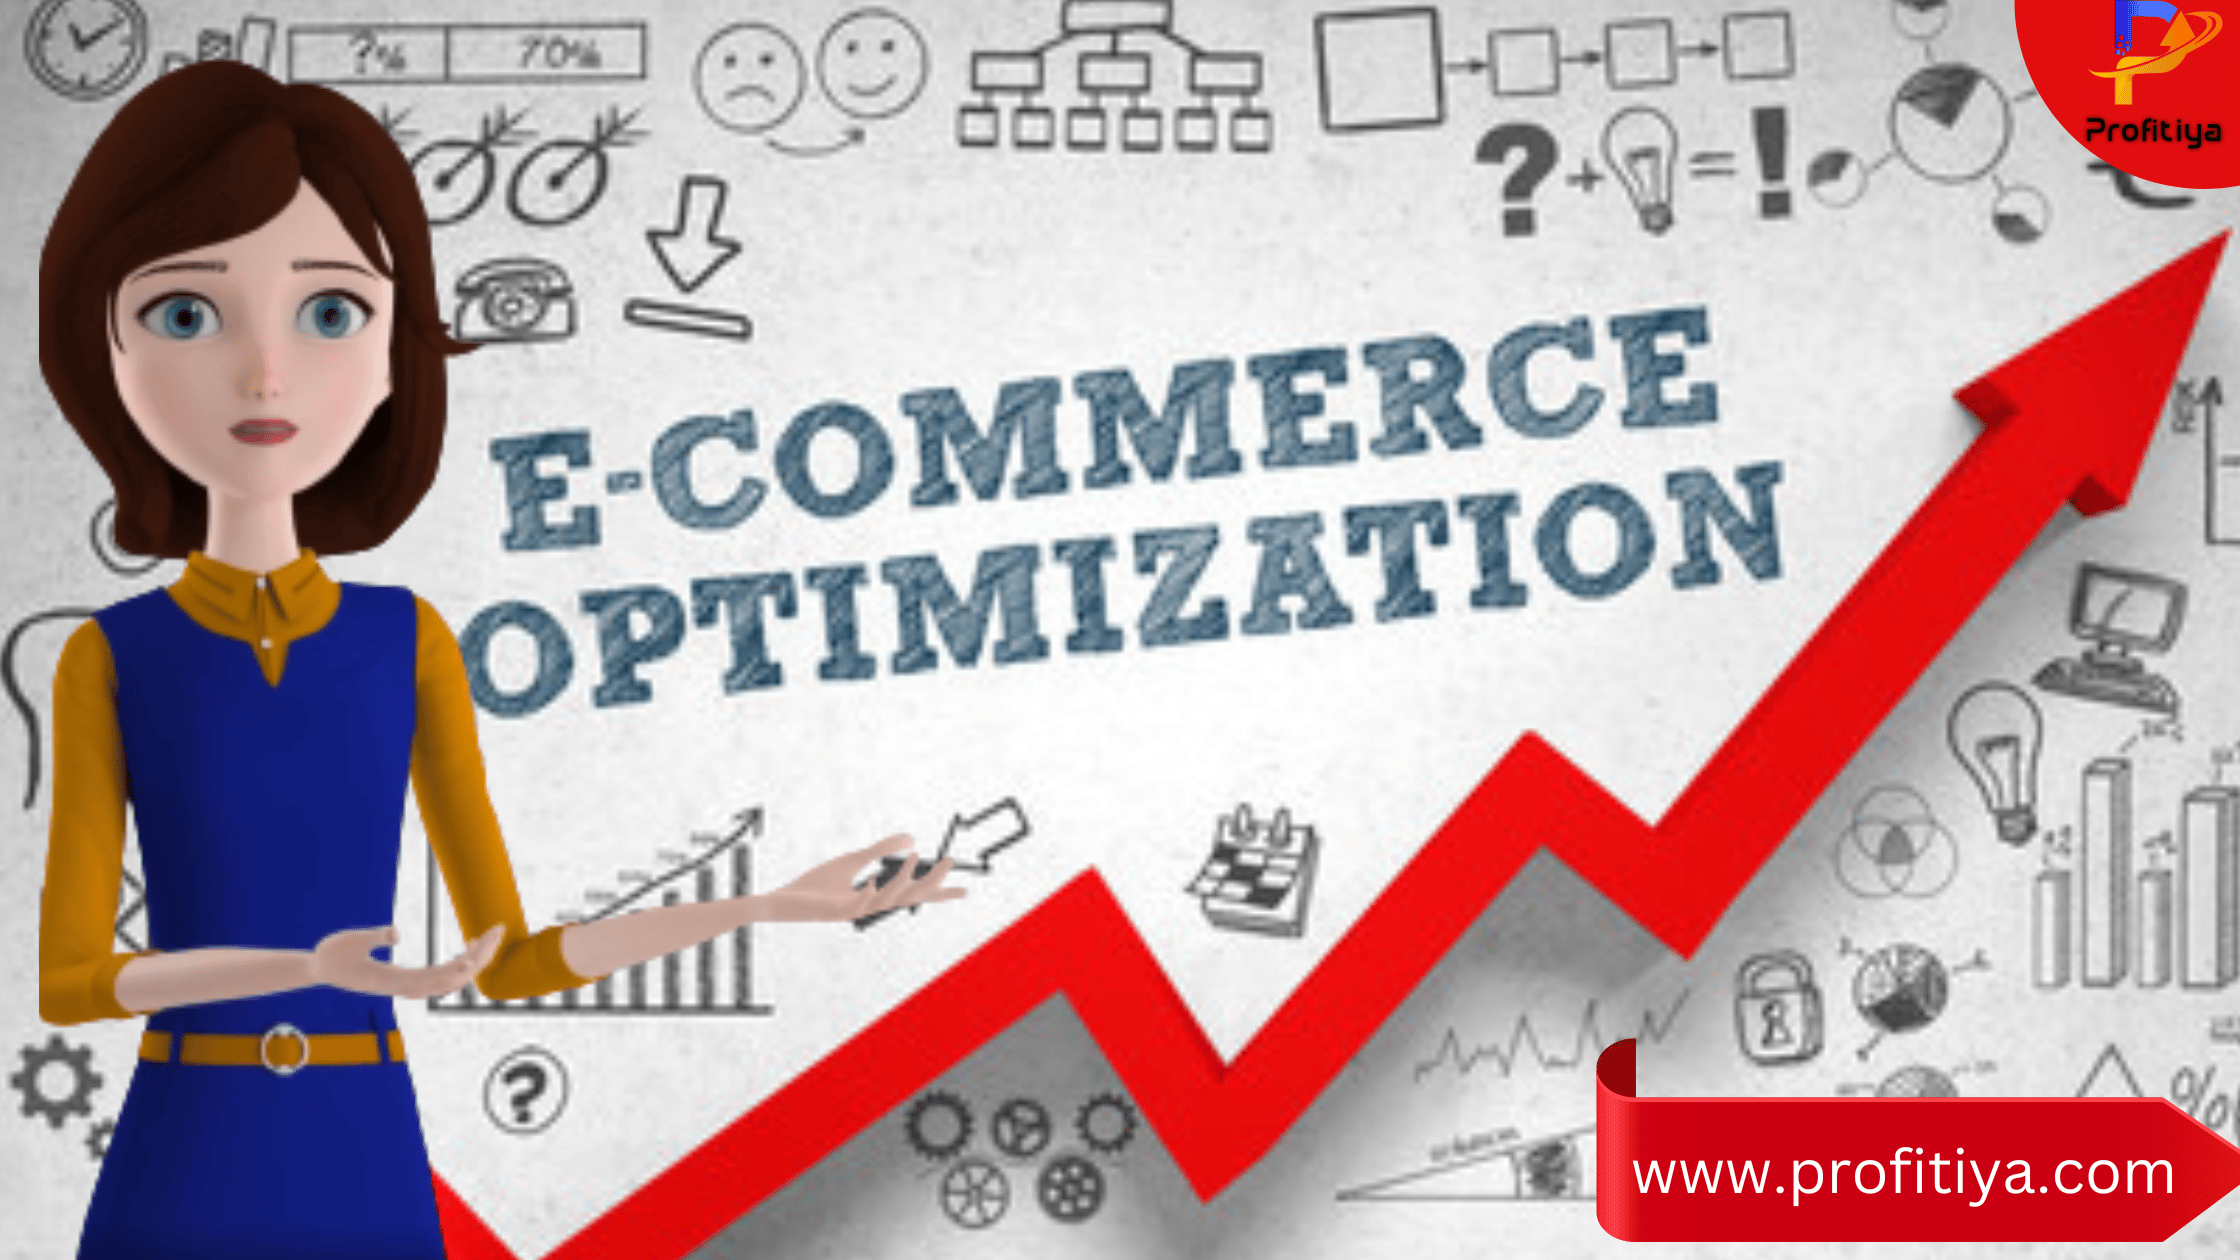 Ecommerce Optimization Why You Need It & How To Do it